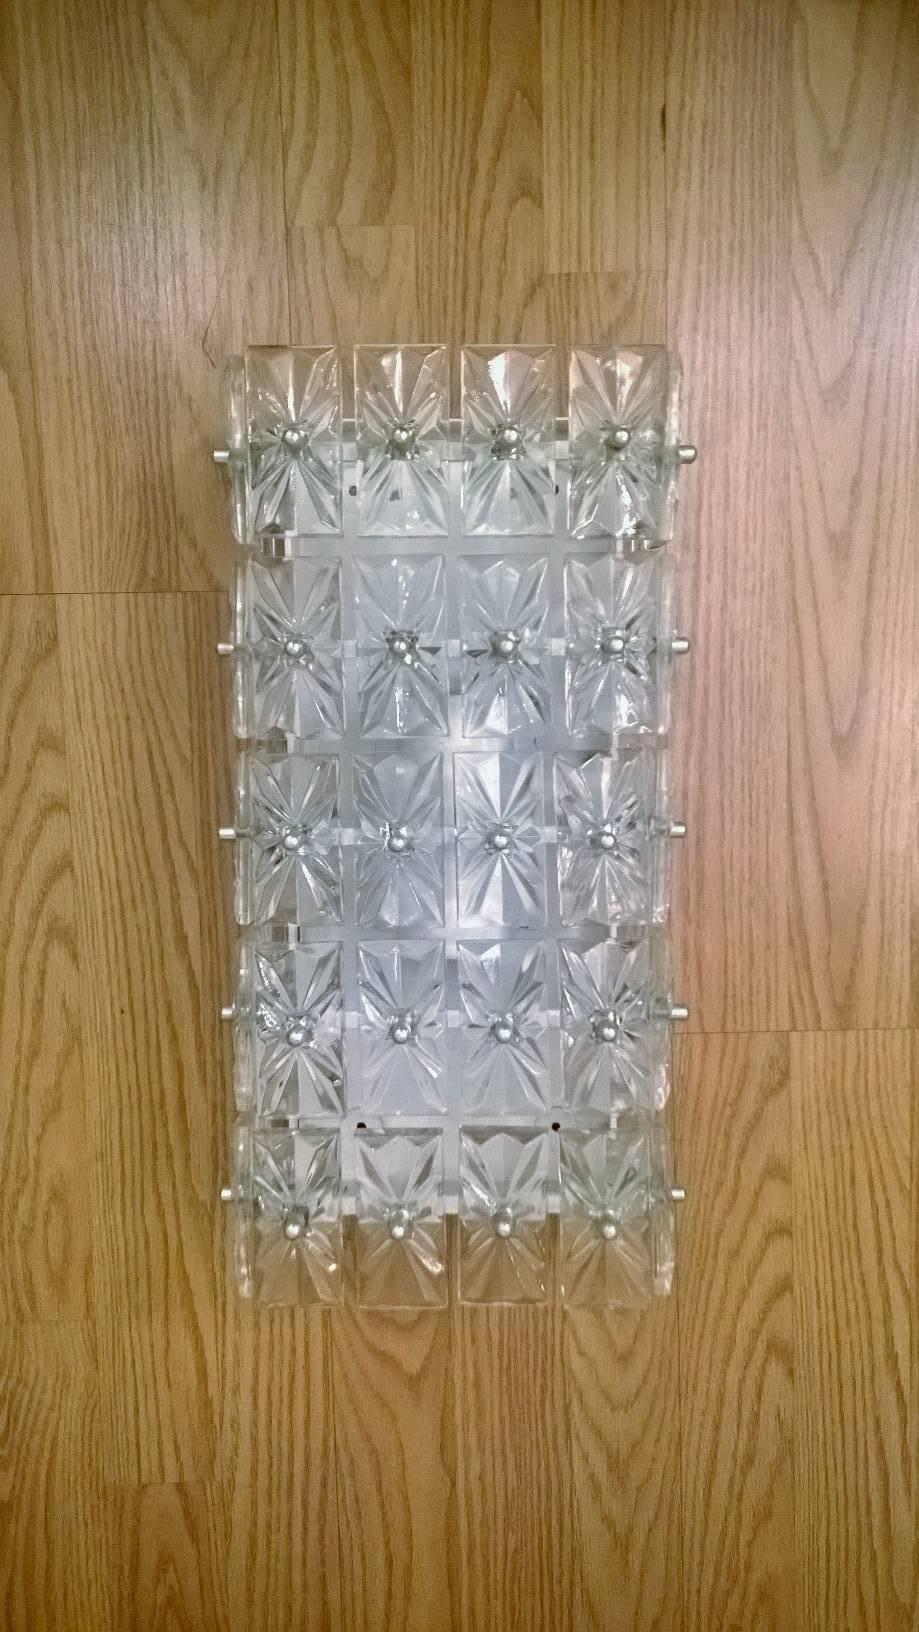 A wonderful pair of large 1960s Austrian crystal sconces composed of a white enamel fixture and chrome fittings holding rectangular crystals. Rewired.